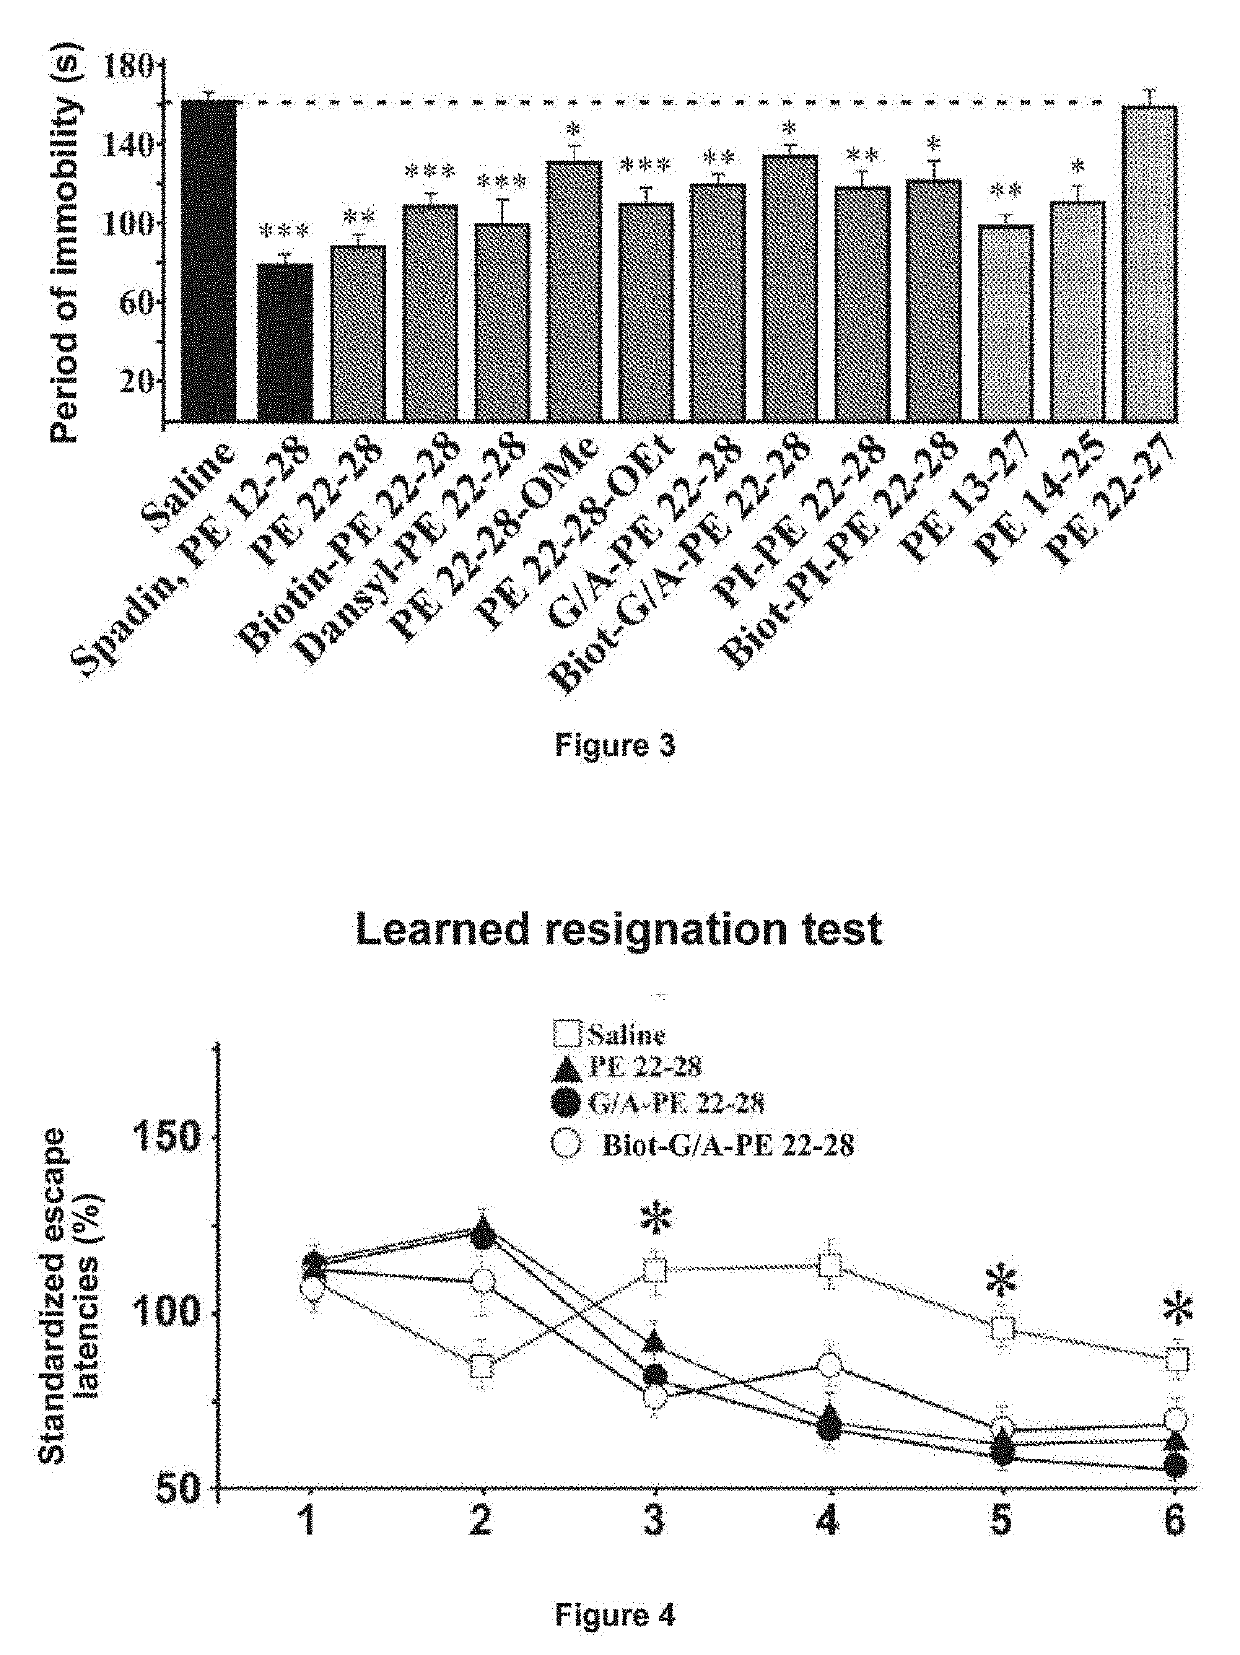 Peptides derived from the propeptide ntsr3 and their use in the treatment of depression